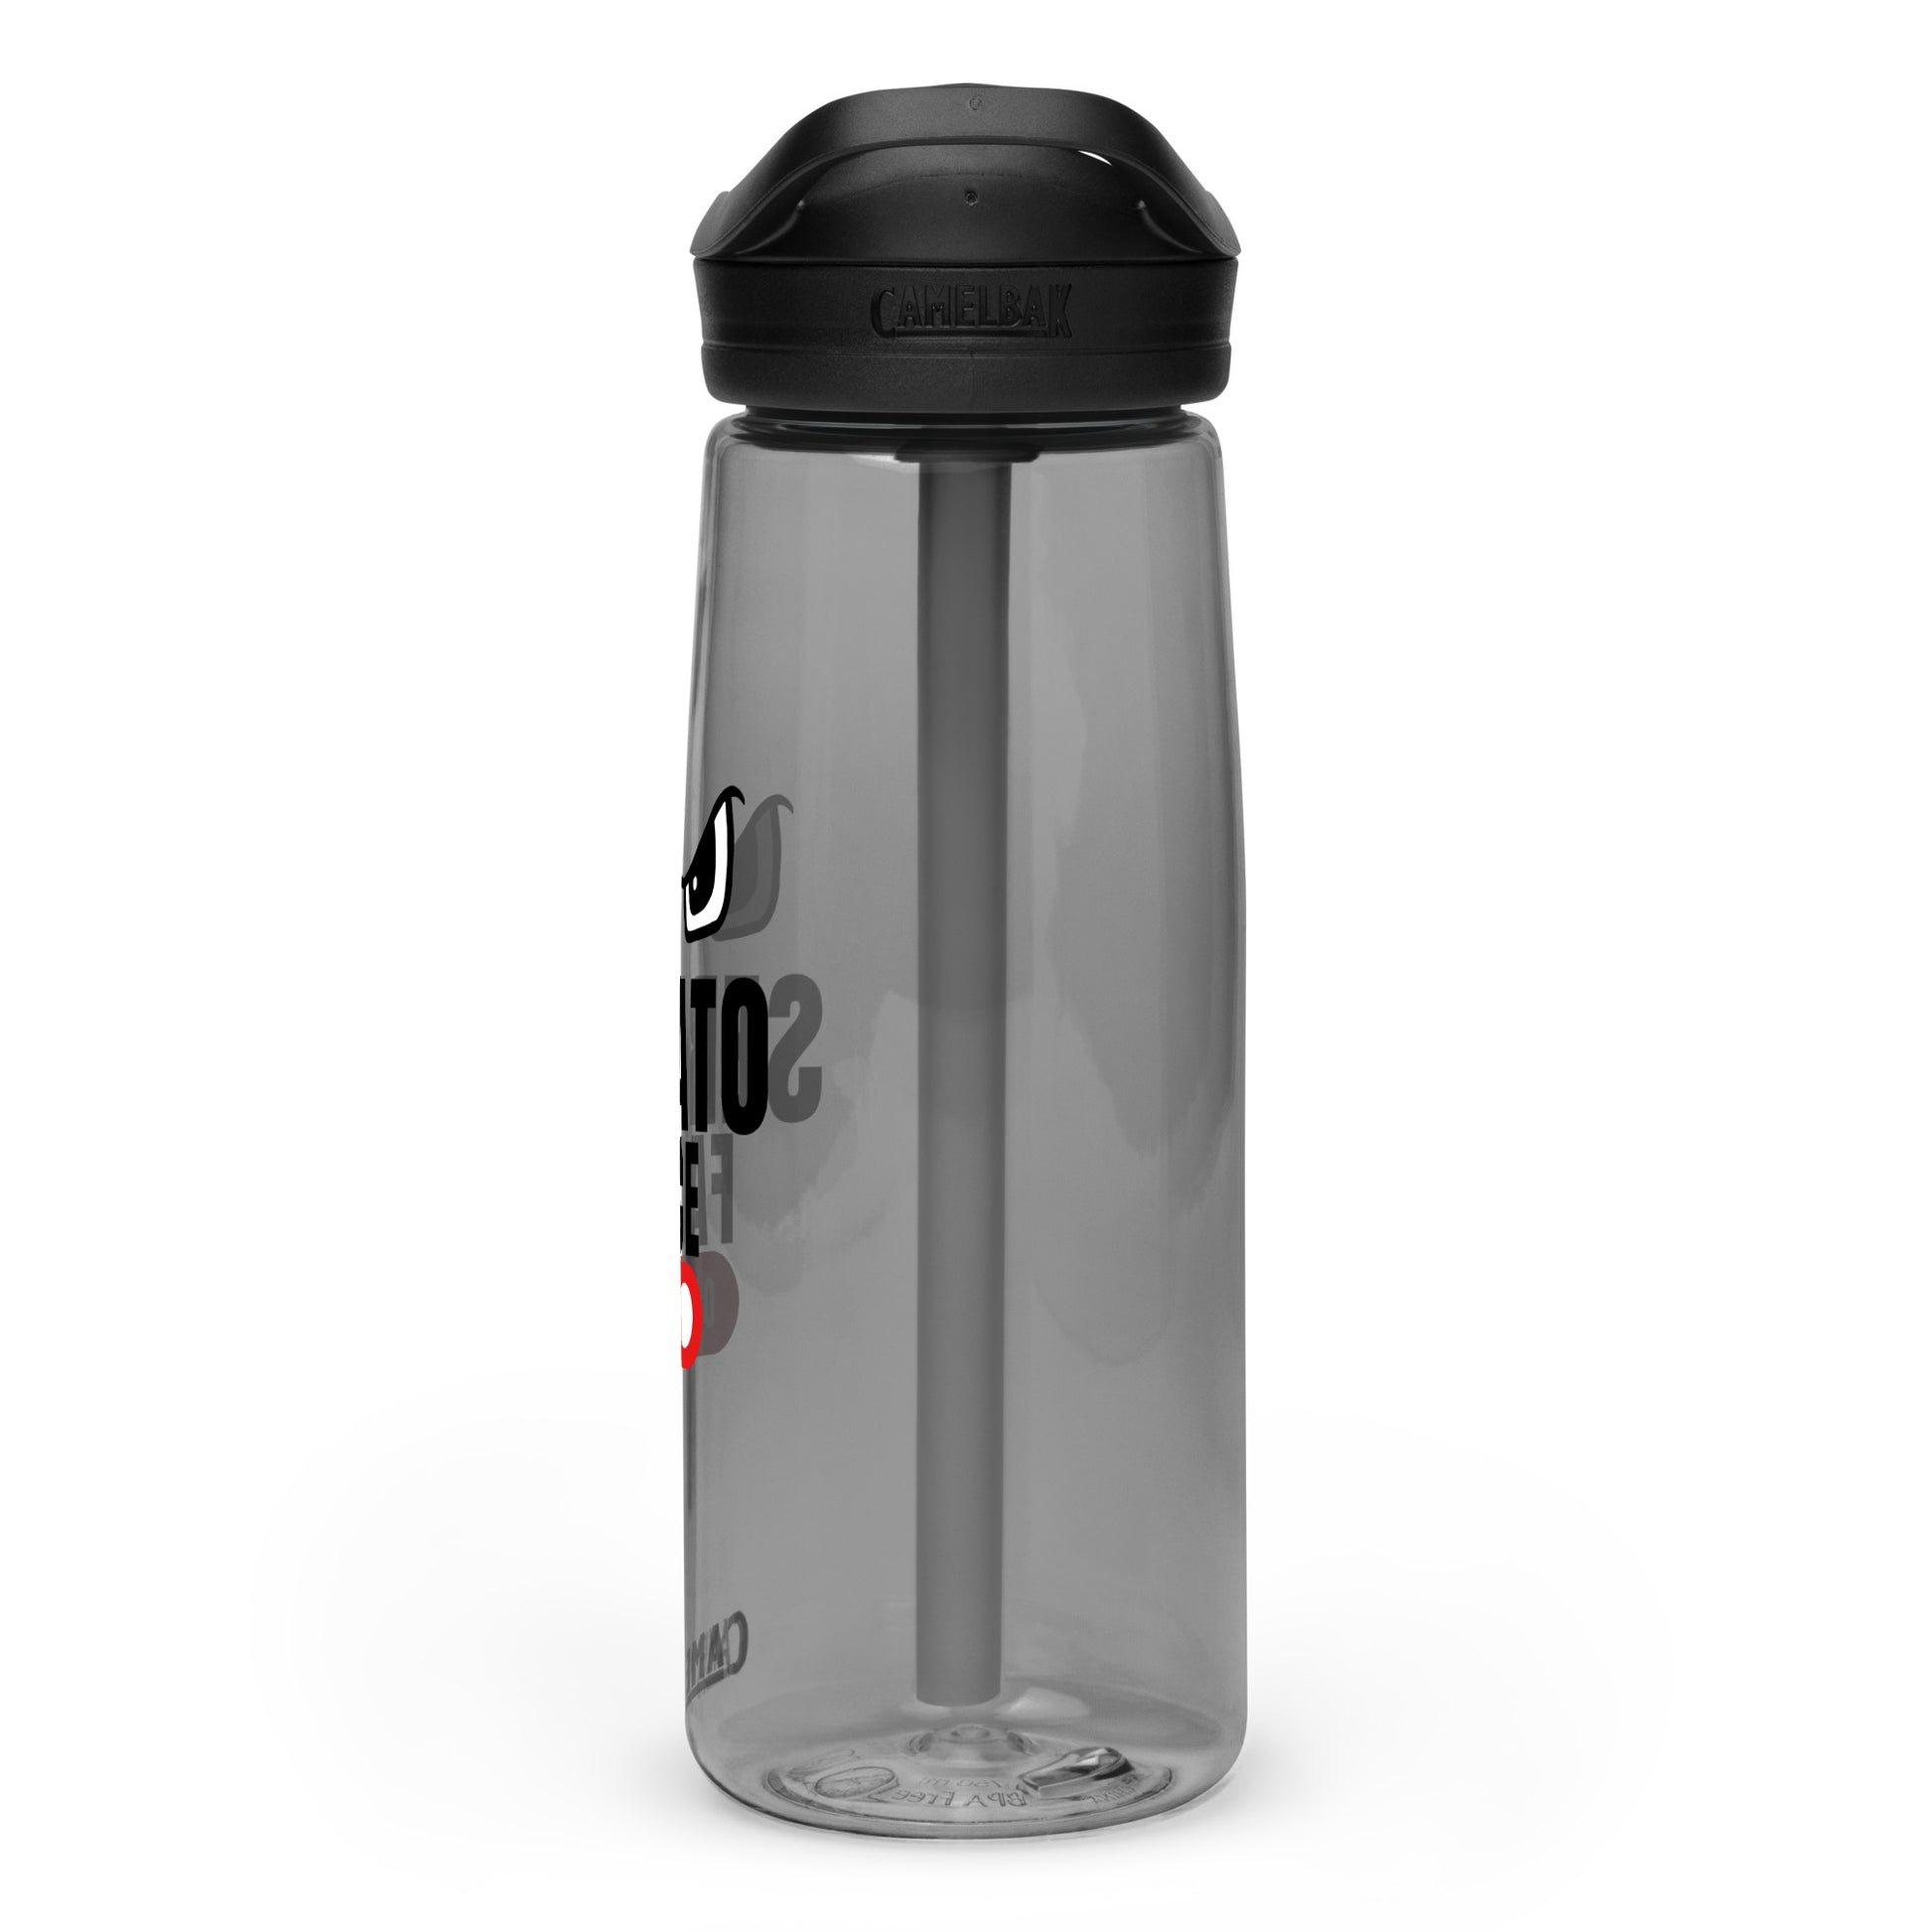 No Serato Face Sports water bottle - Another Bodega